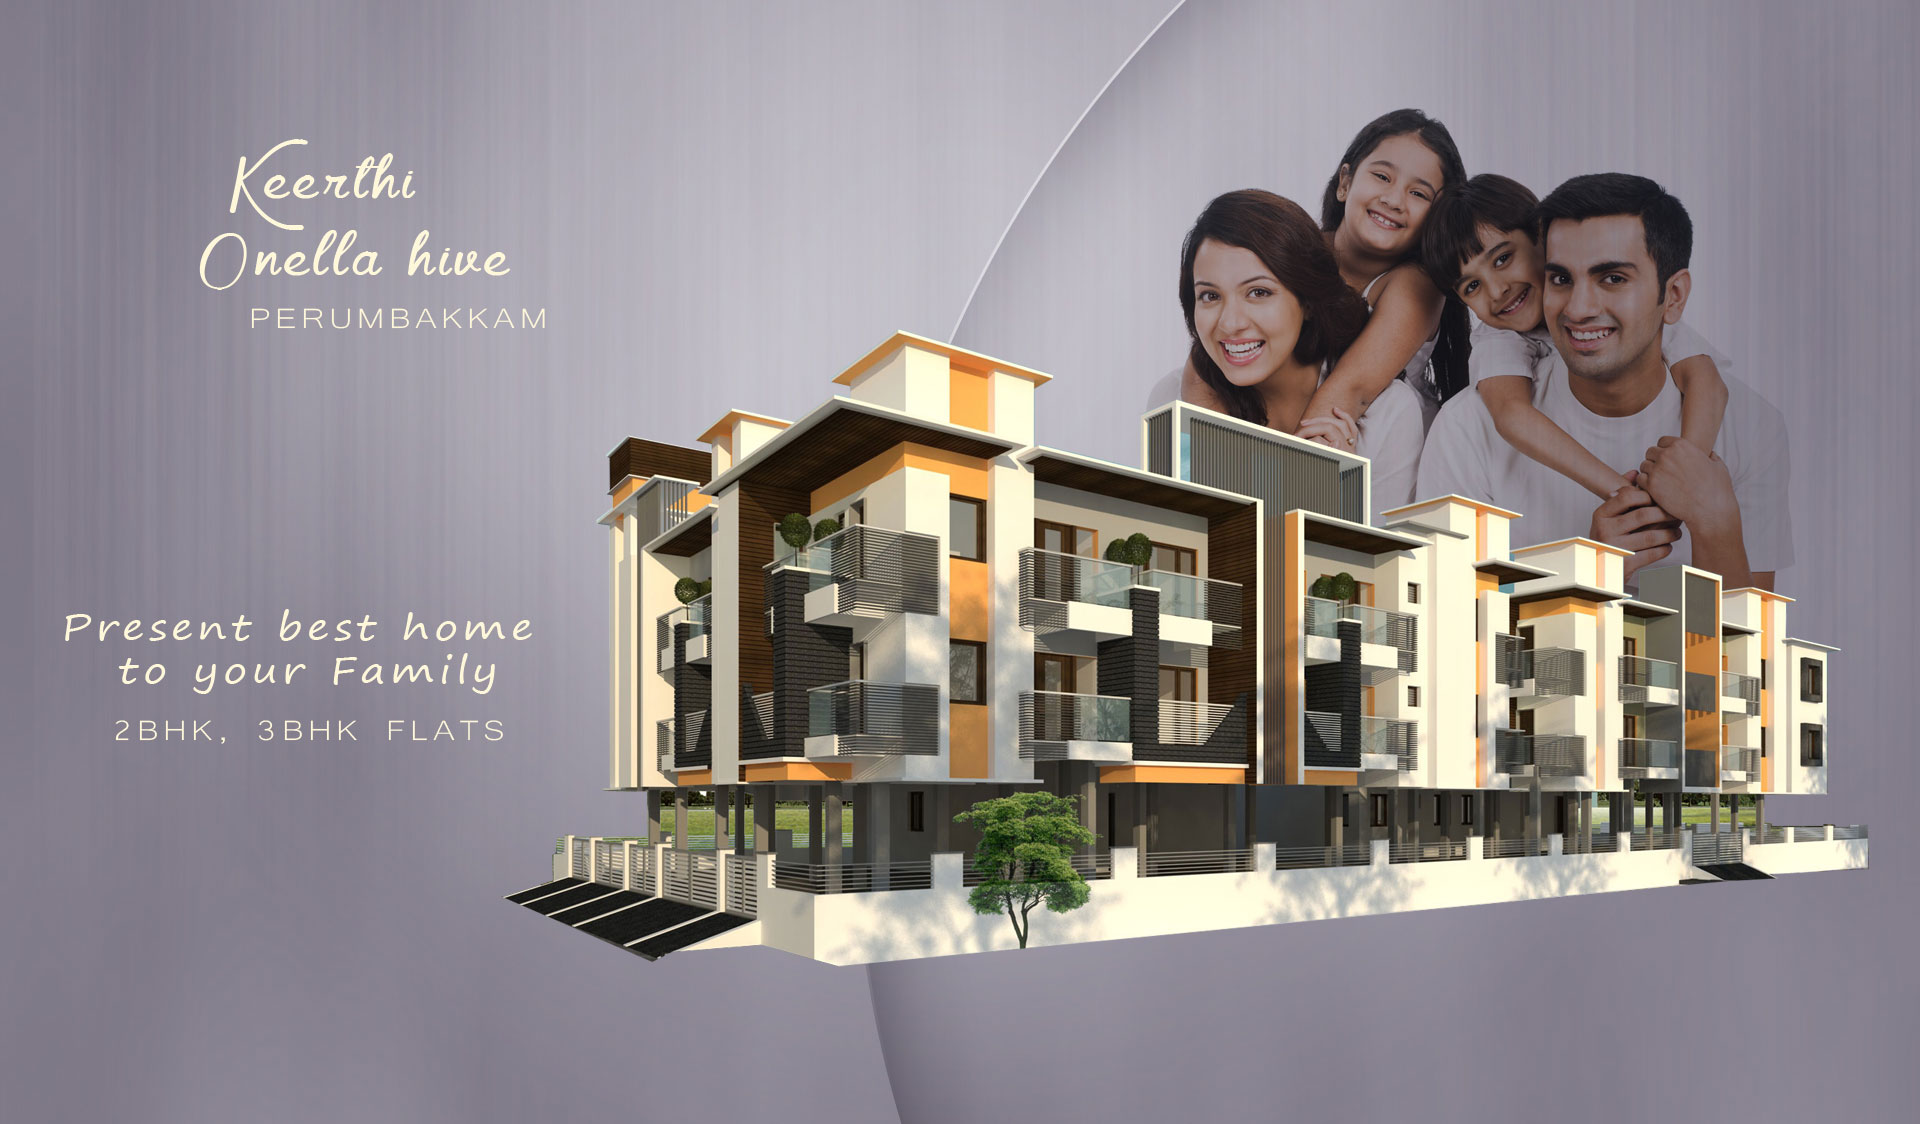 Keerthi Onella Hive offers a luxury home as well as a place of solace and solitude